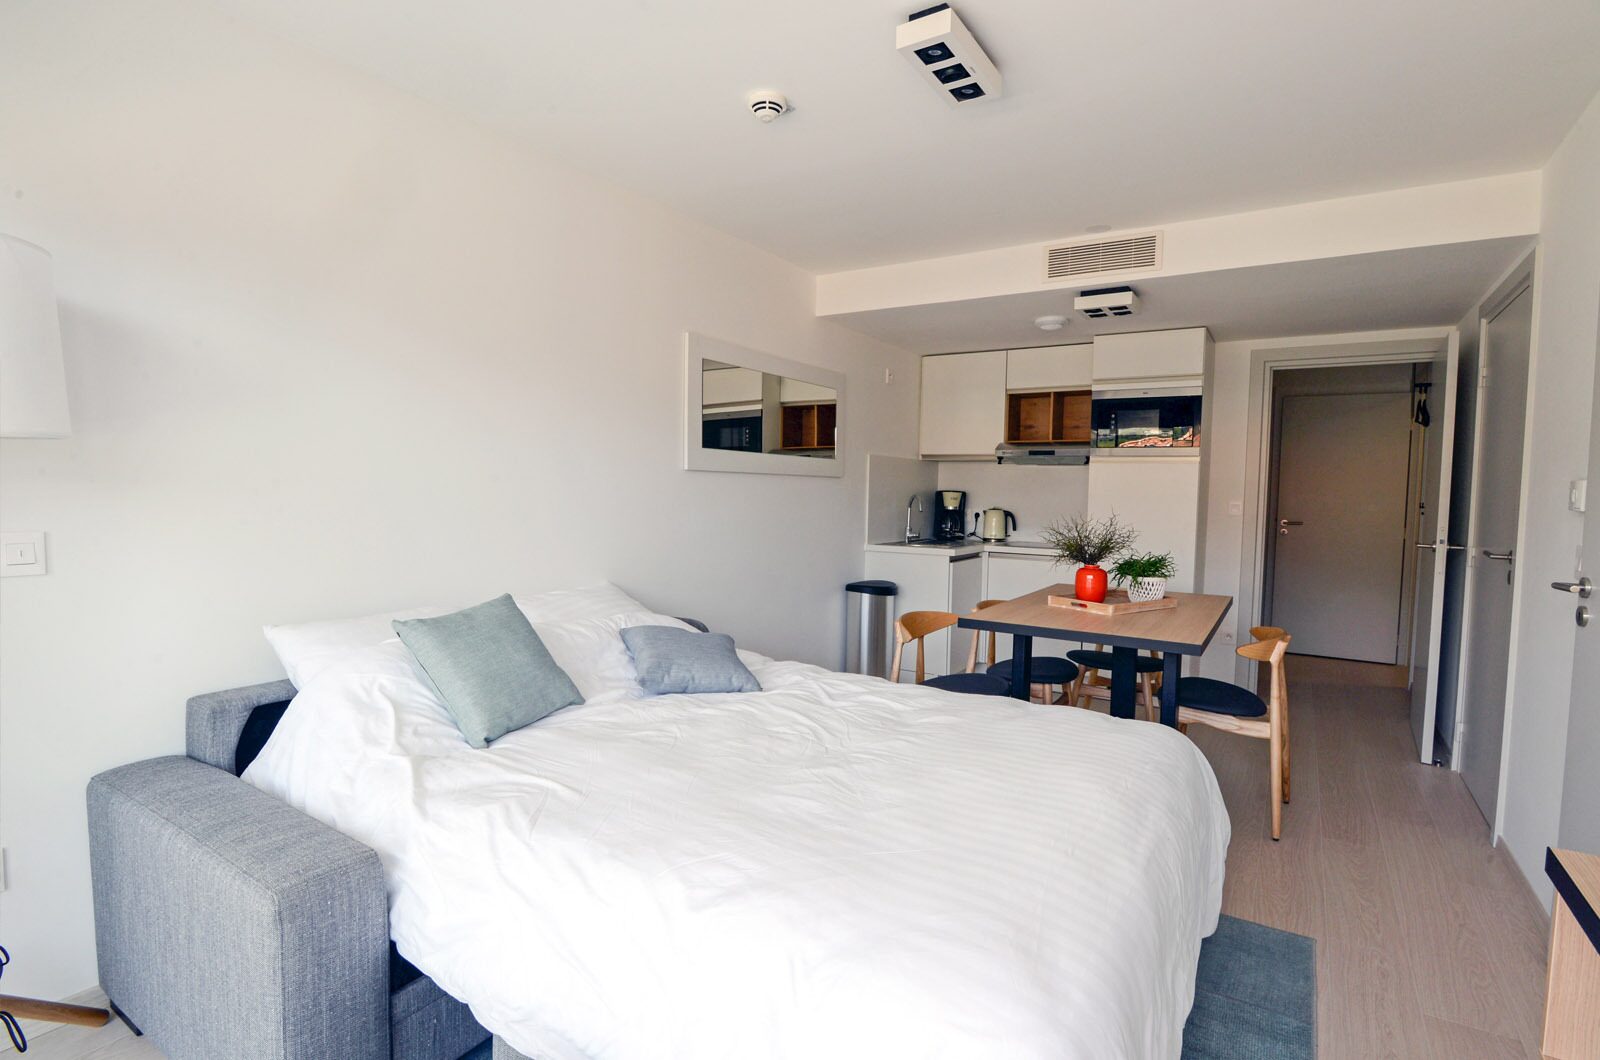 New standard suite for 6 people with double bed, single beds and a sofabed.